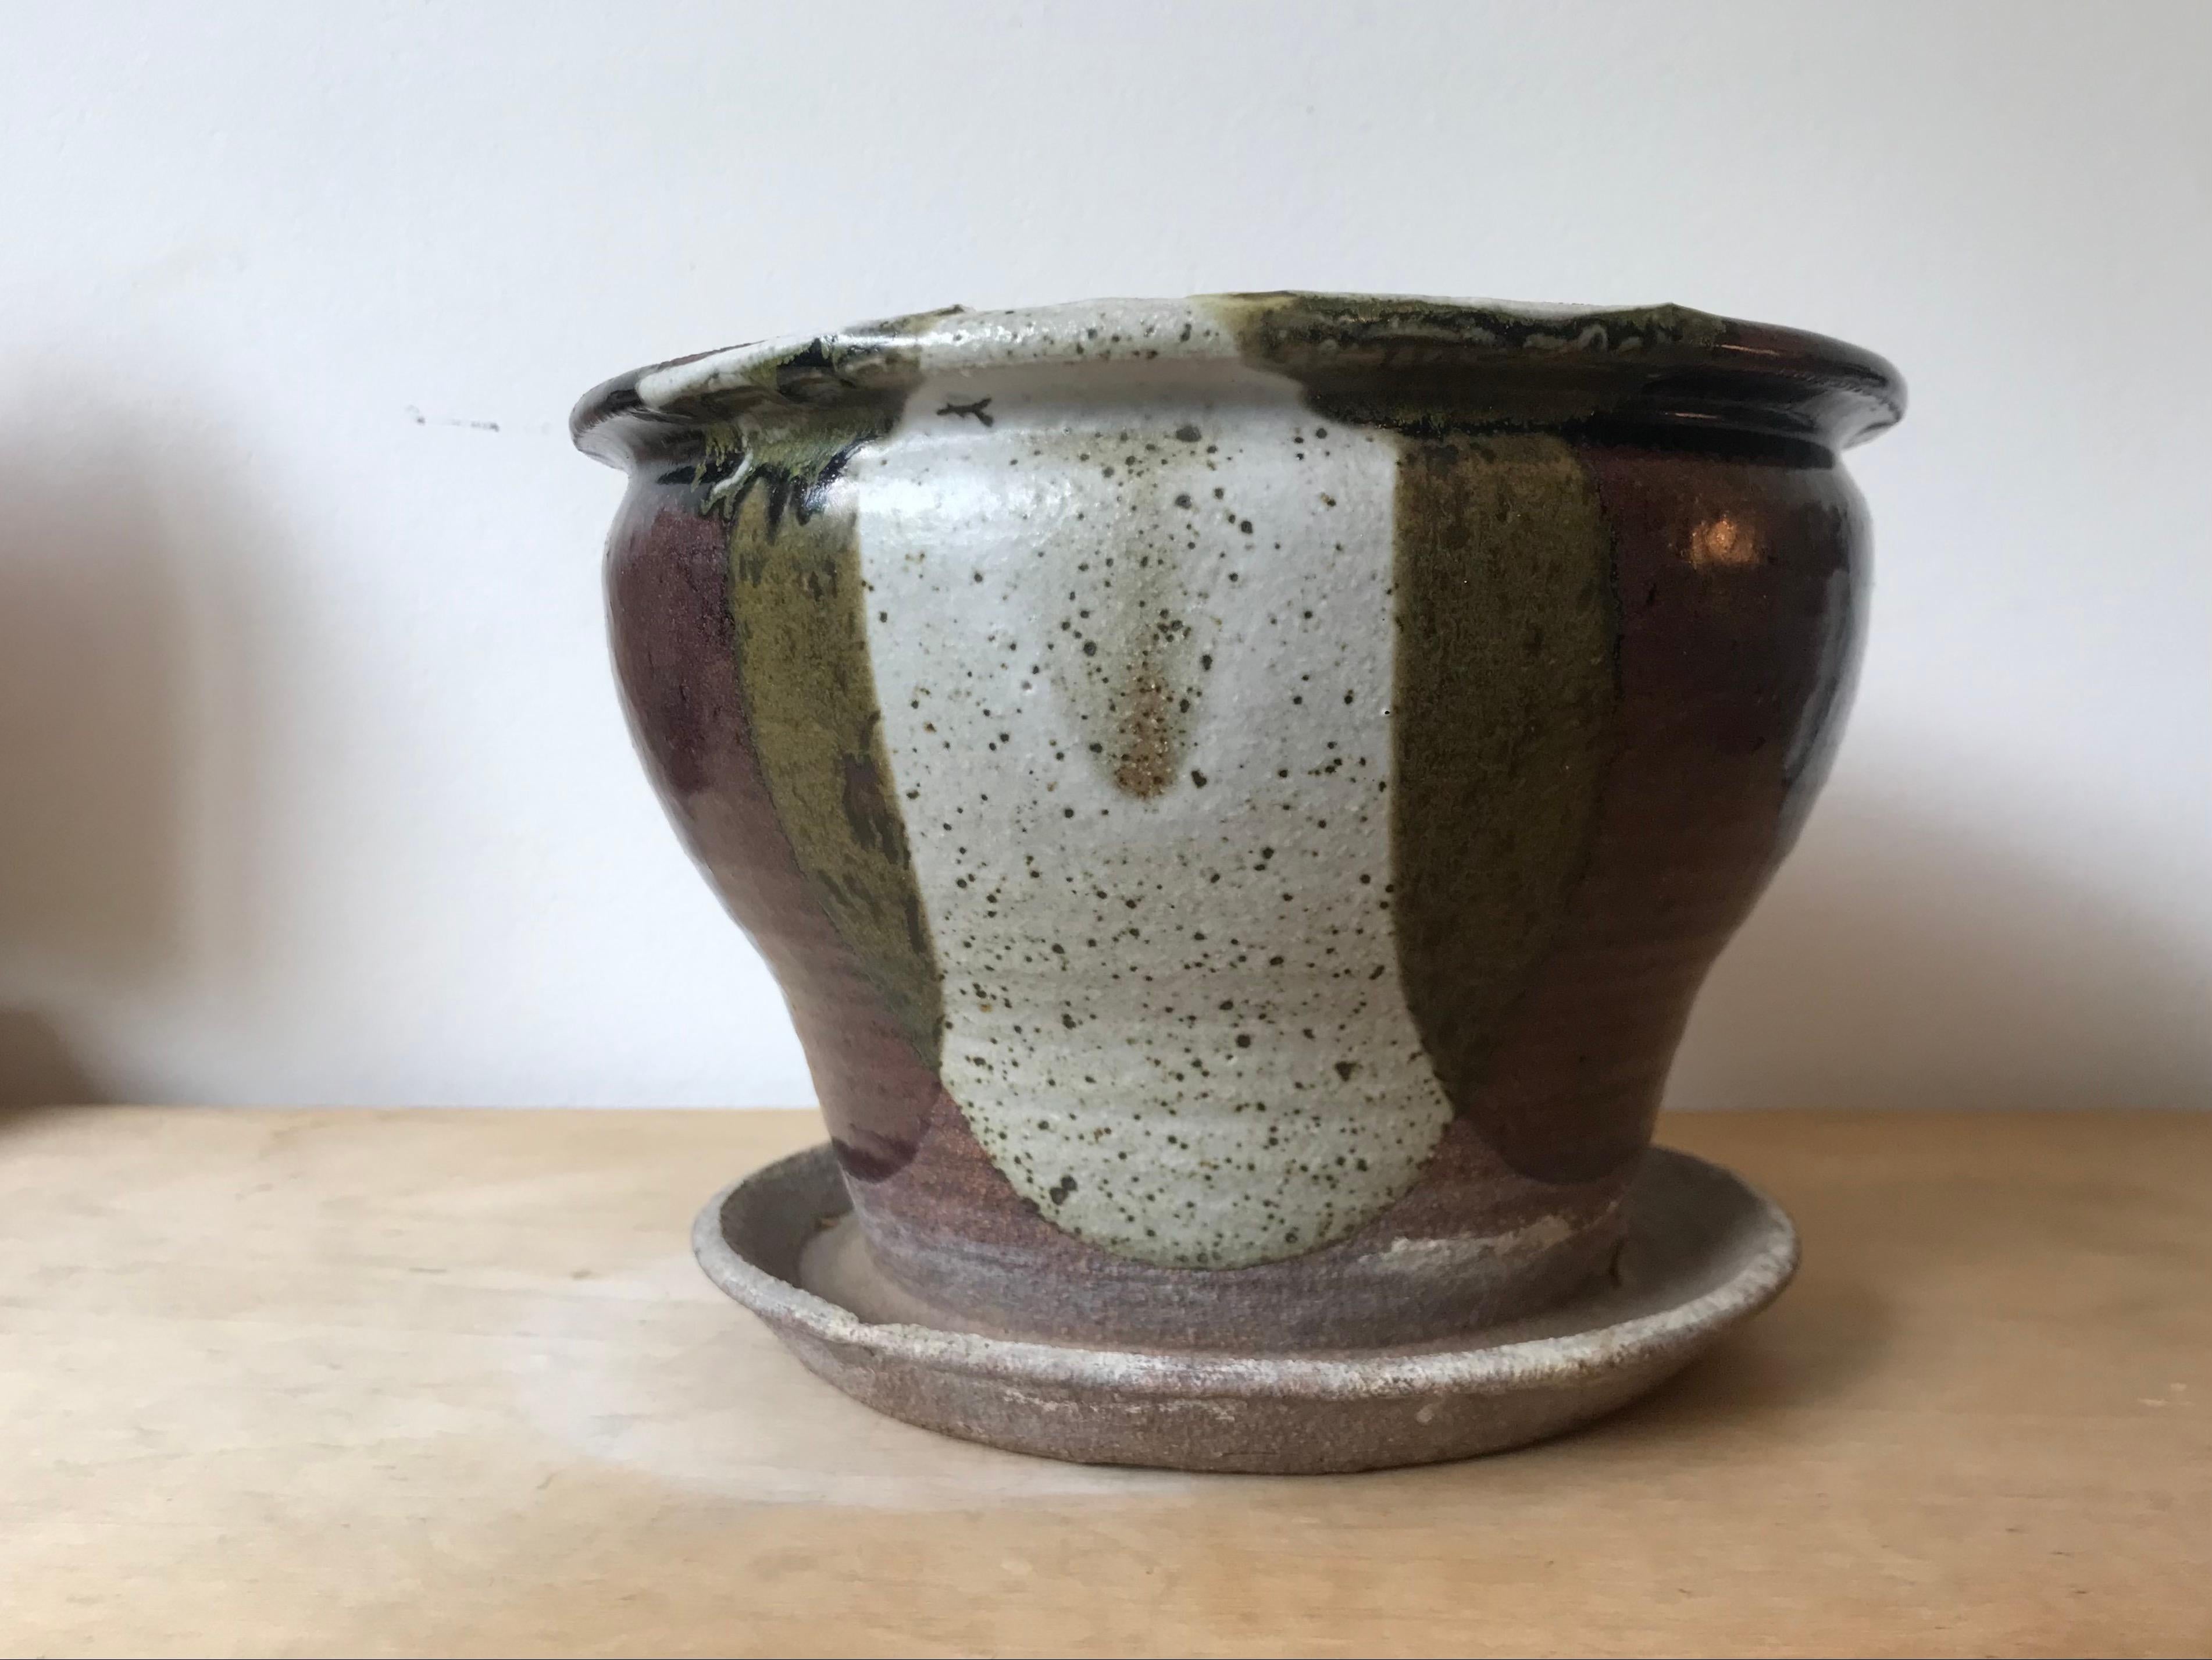 Great California design.
Rare scale.
These small planters were wheel thrown and made in limited production for the gift shop at Architectural Pottery Los Angeles.
Made with Cressey's own 